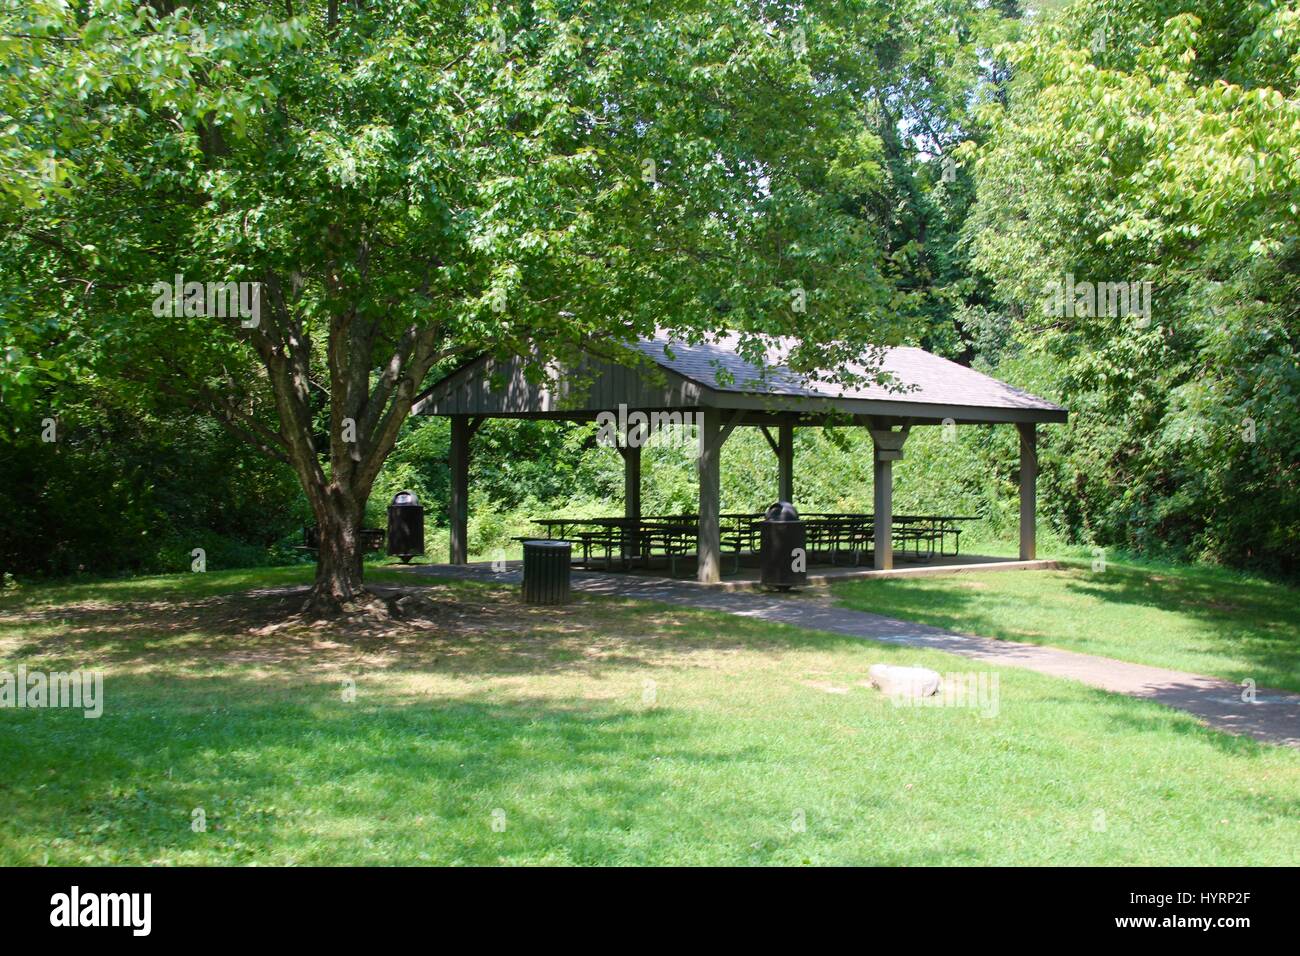 The picnic shelter in the park on a sunny summer day. Stock Photo